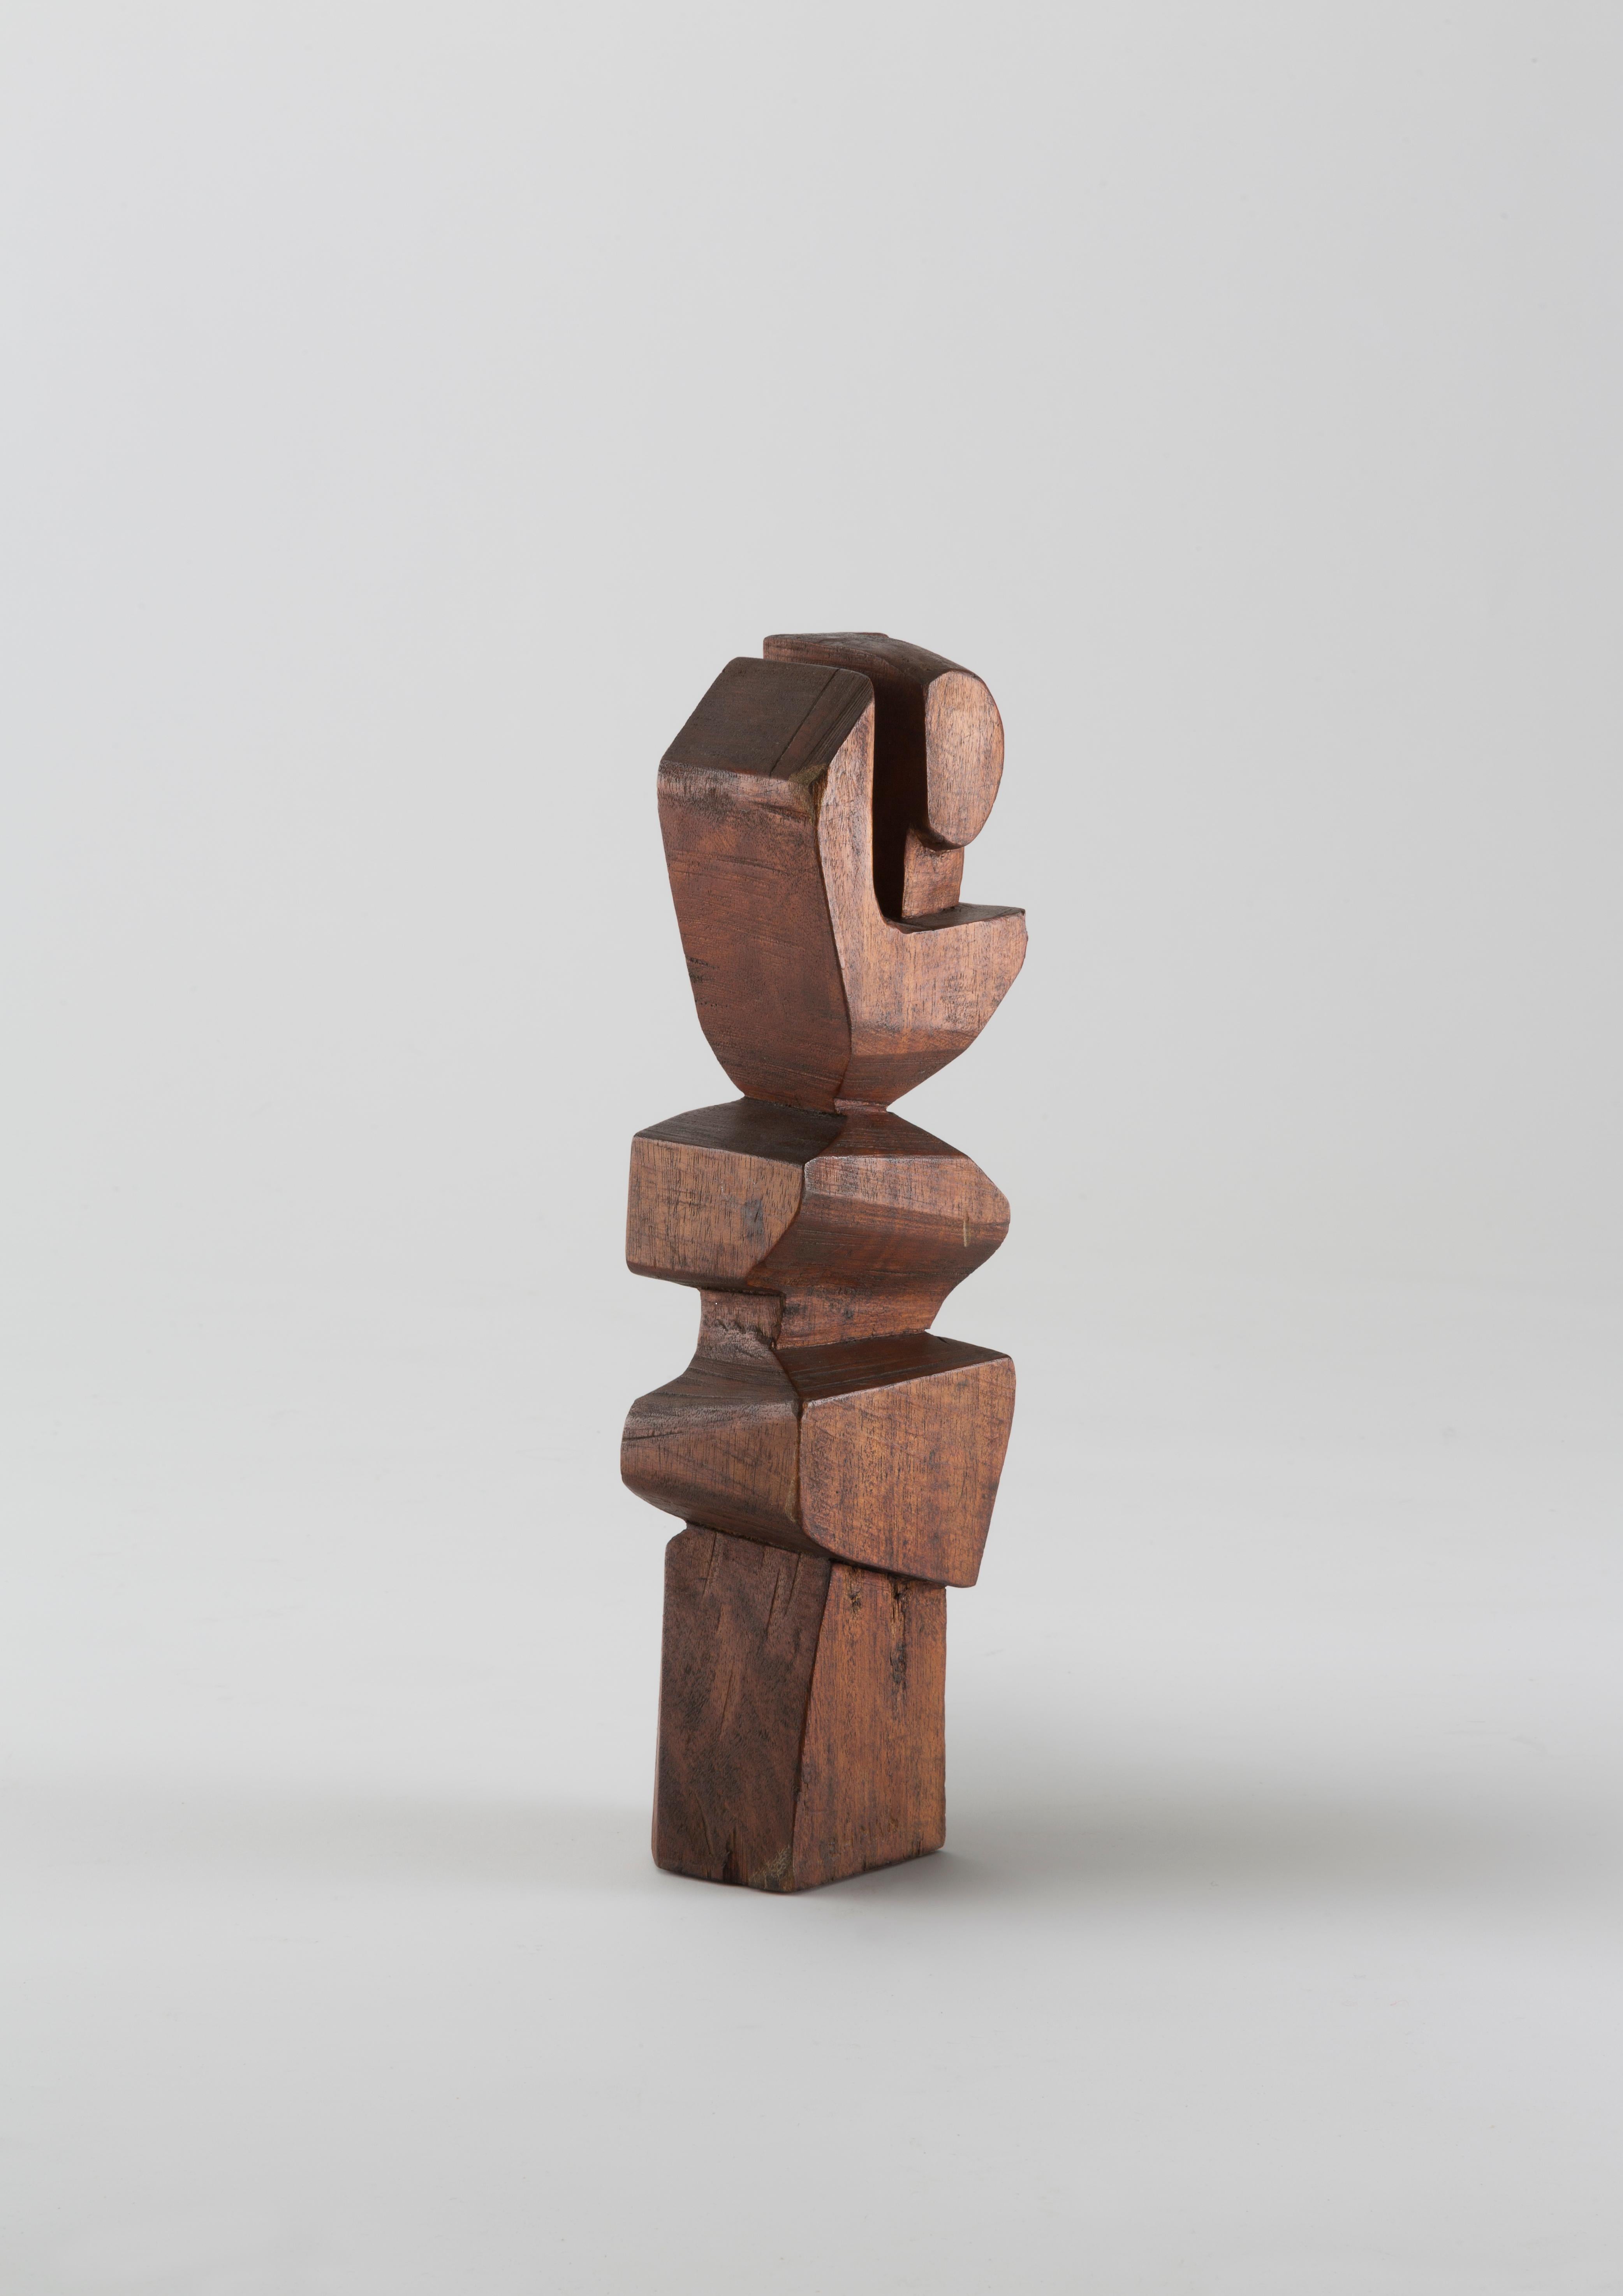 A Modernist sculpture, in sculpted solid wood, in the style of Isamu Noguchi, circa 1960, signed 